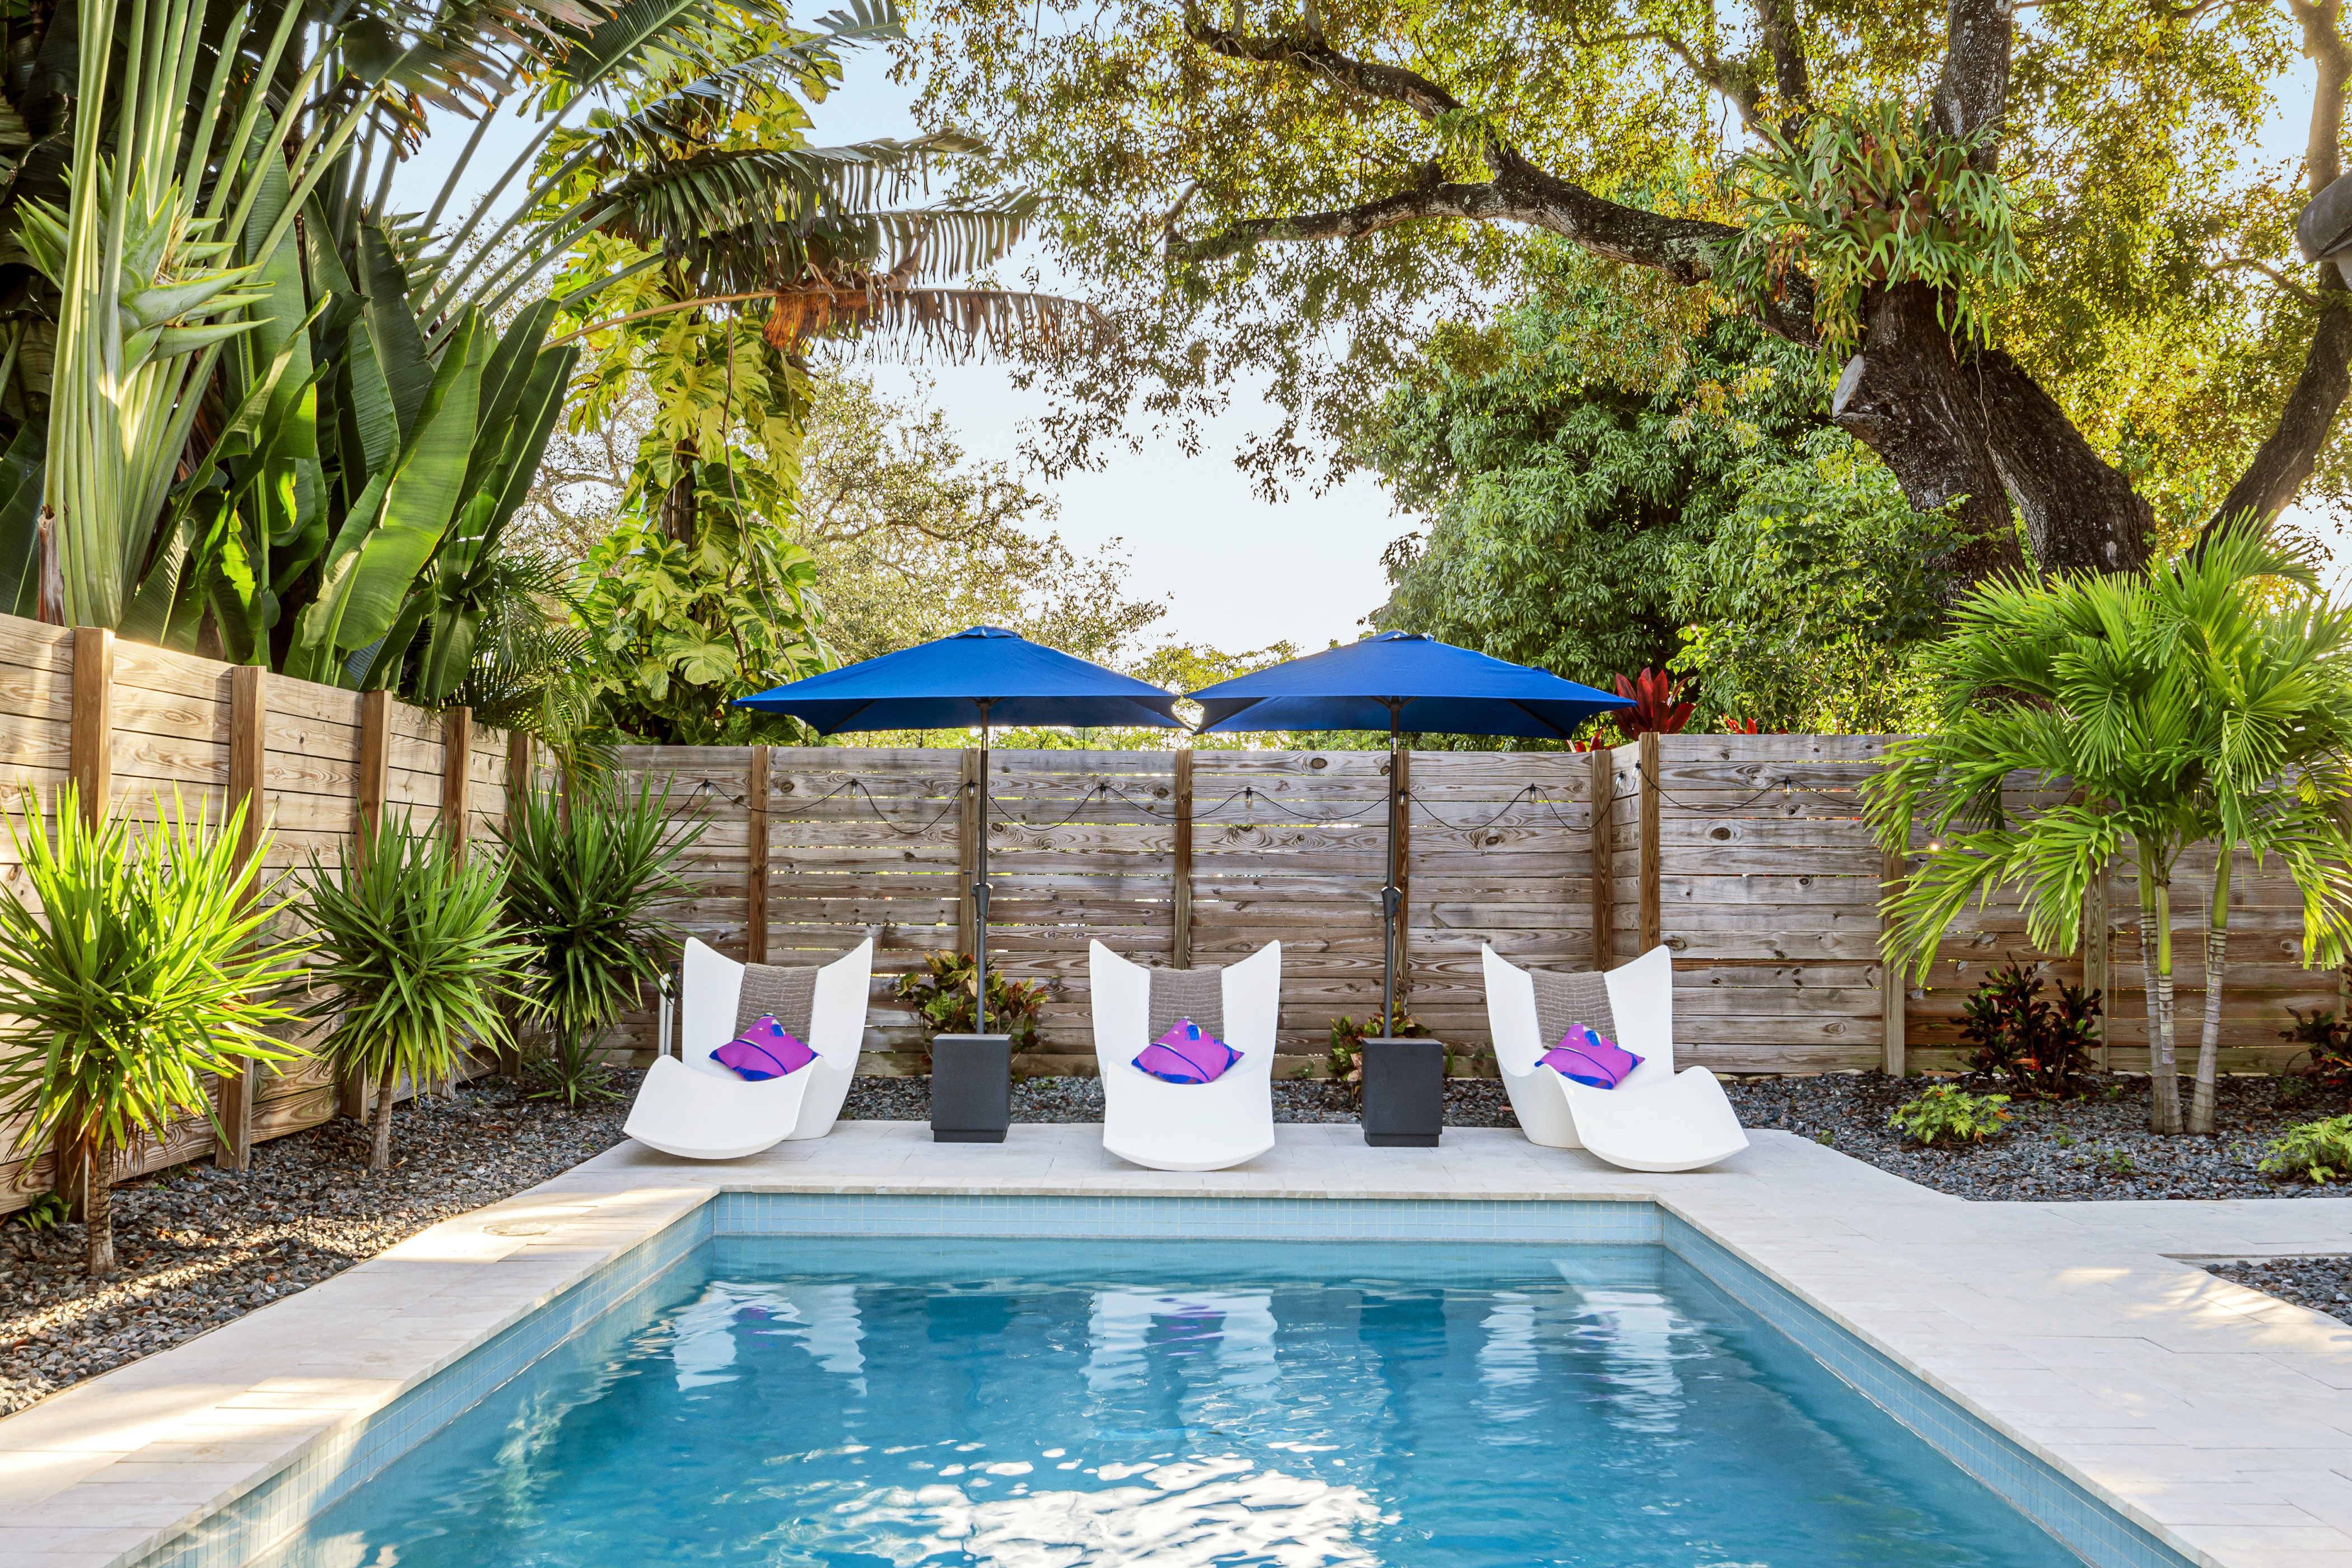 Pool area featuring three lounge chairs and umbrellas